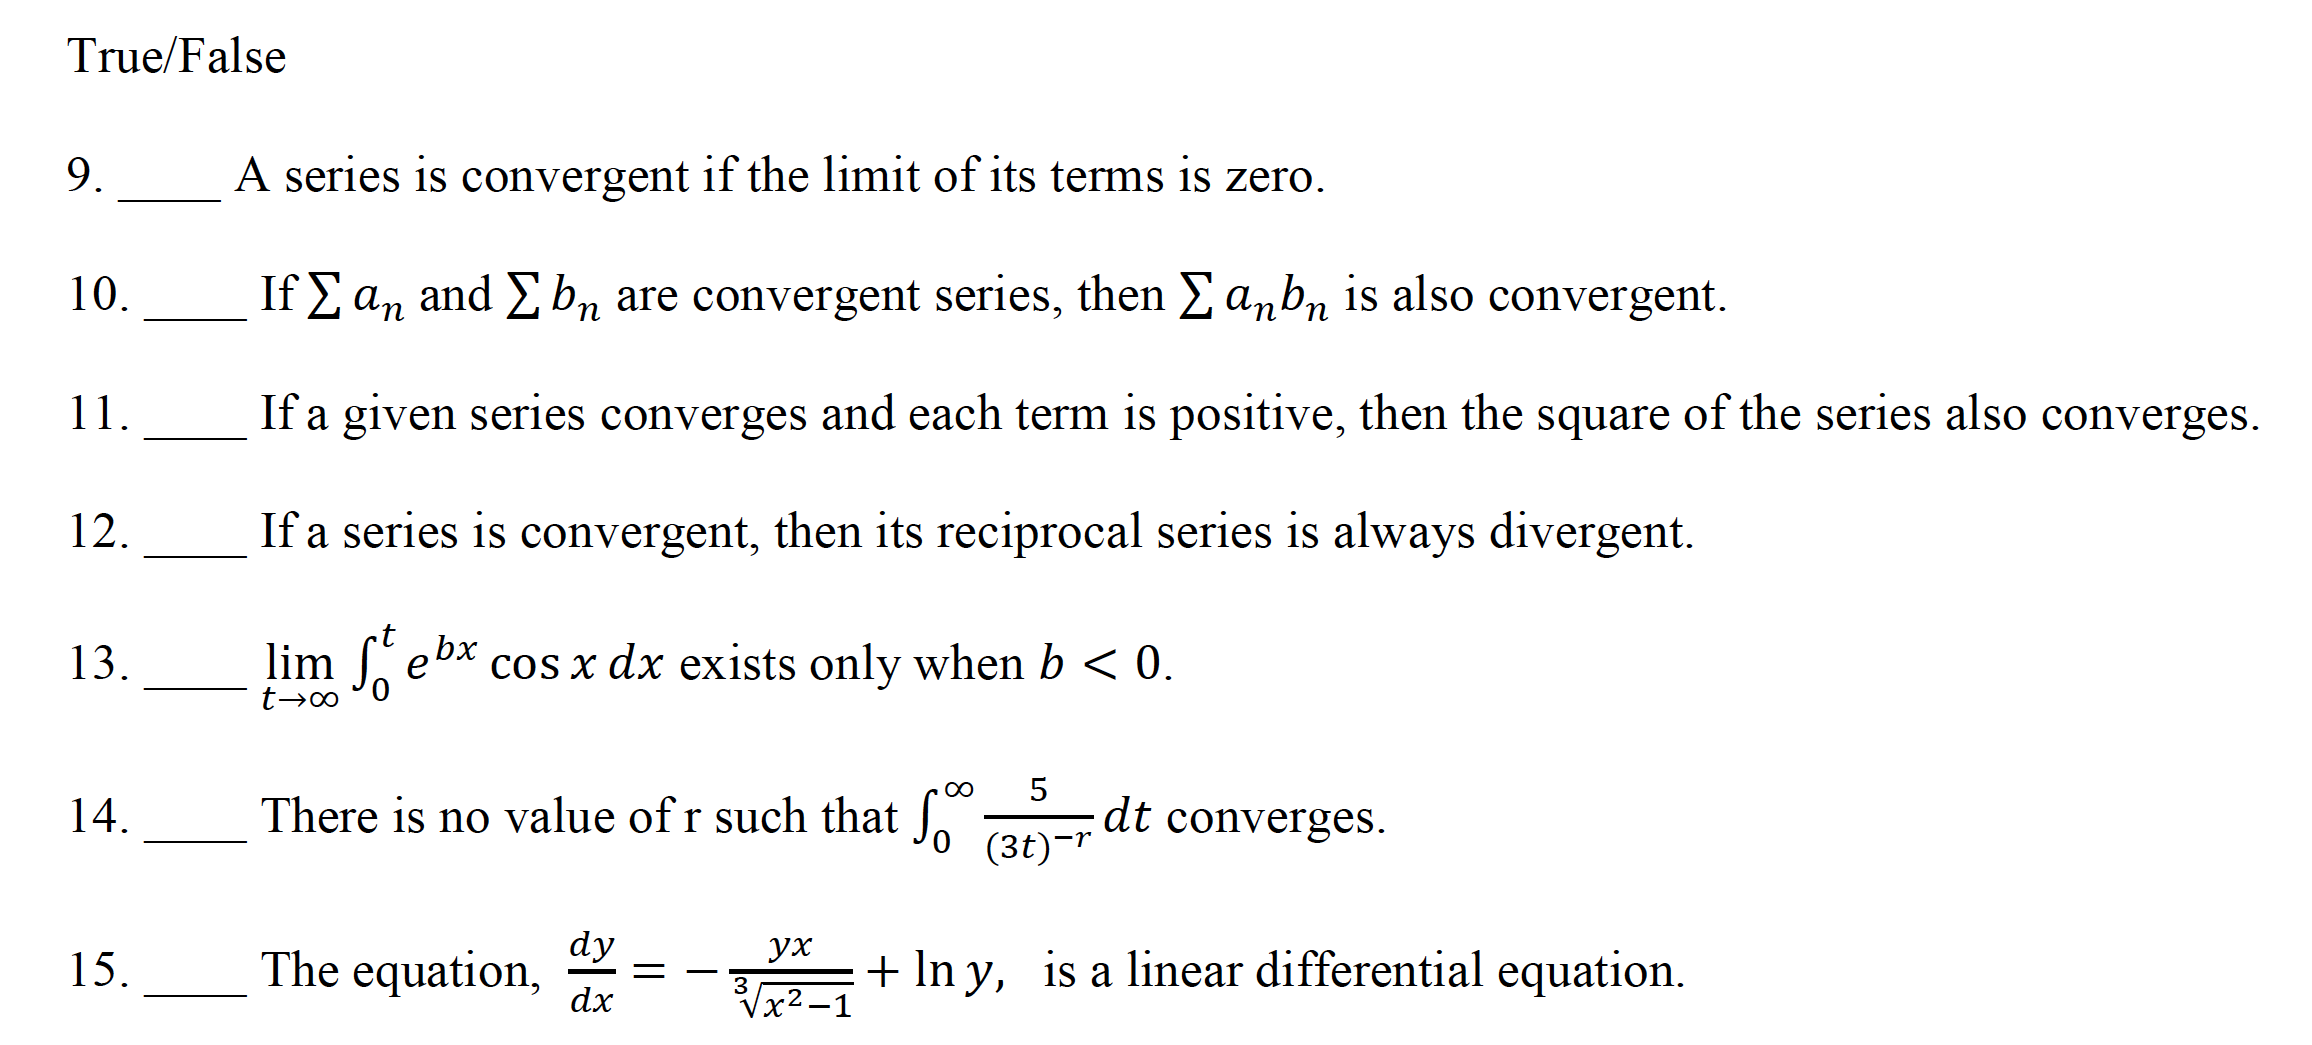 There is no value of r such that Jo (3t)-r
5
dt converges.
14.
